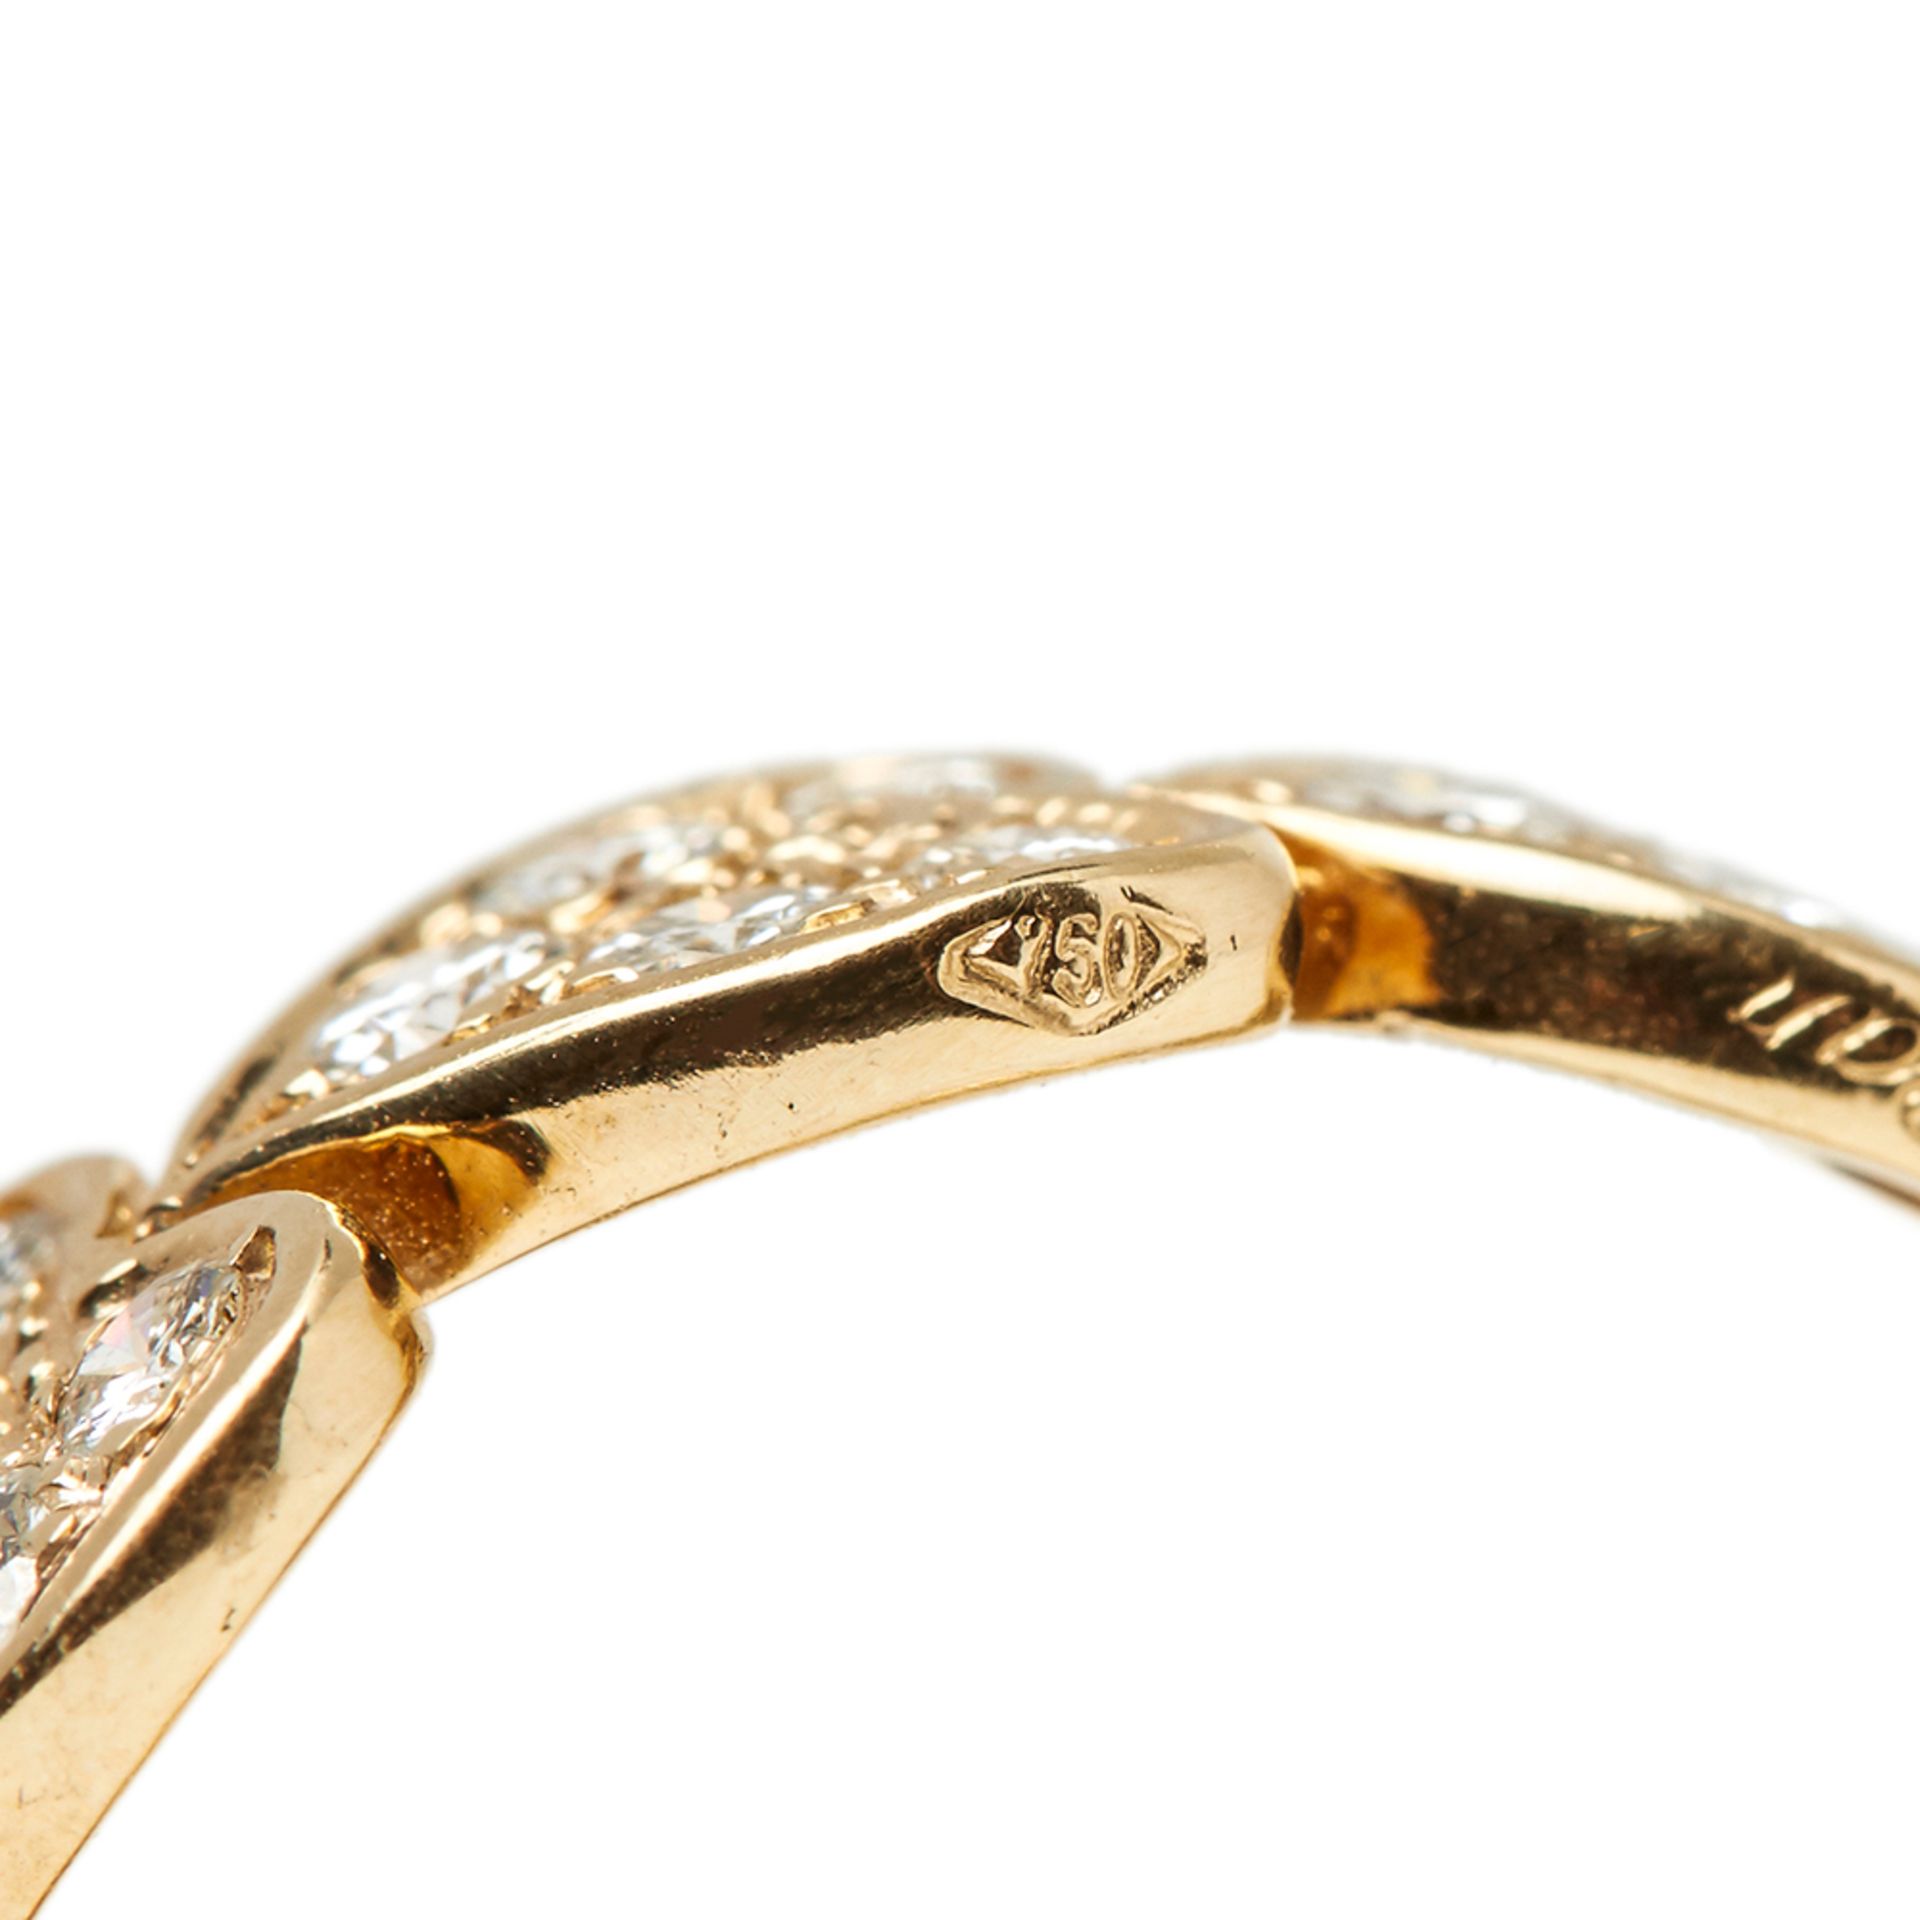 Cartier 18k Yellow Gold Diamond Heart Ring - Image 10 of 23